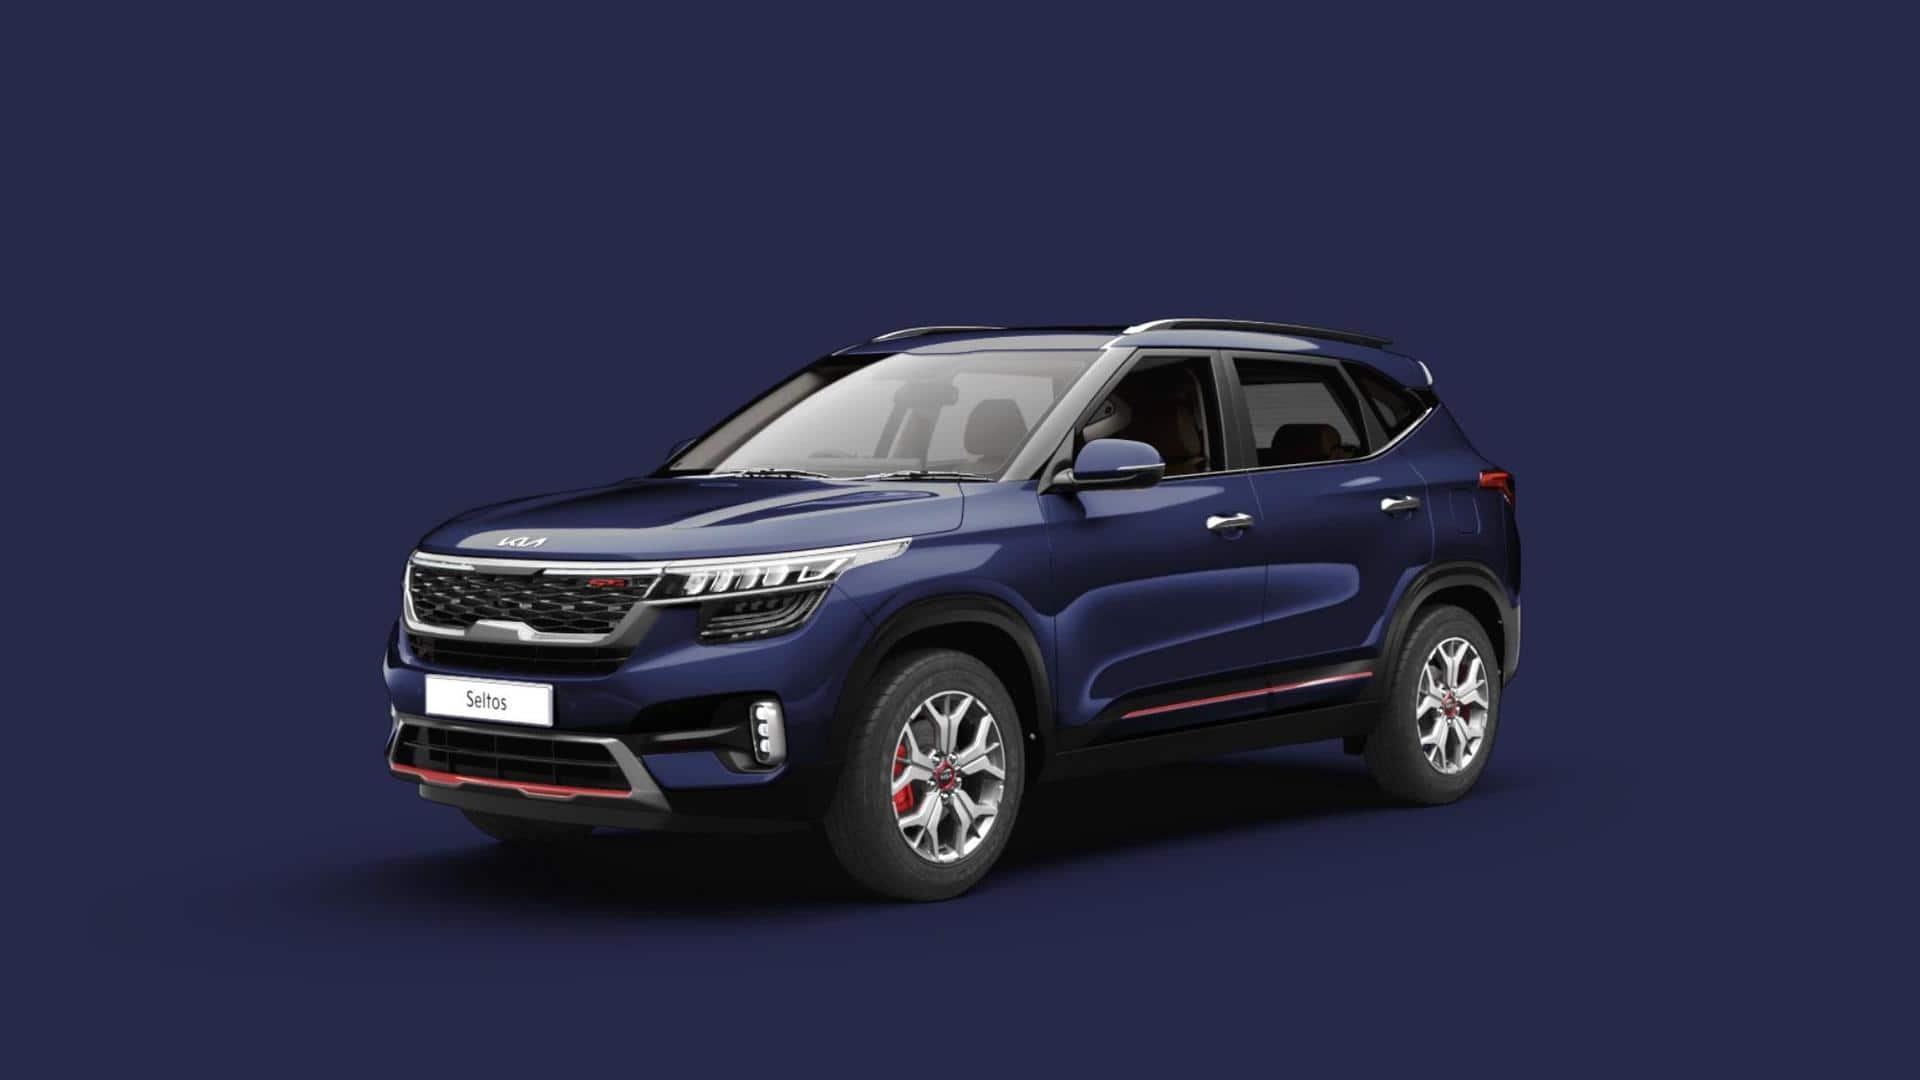 Kia Seltos (facelift) to arrive in August: What to expect